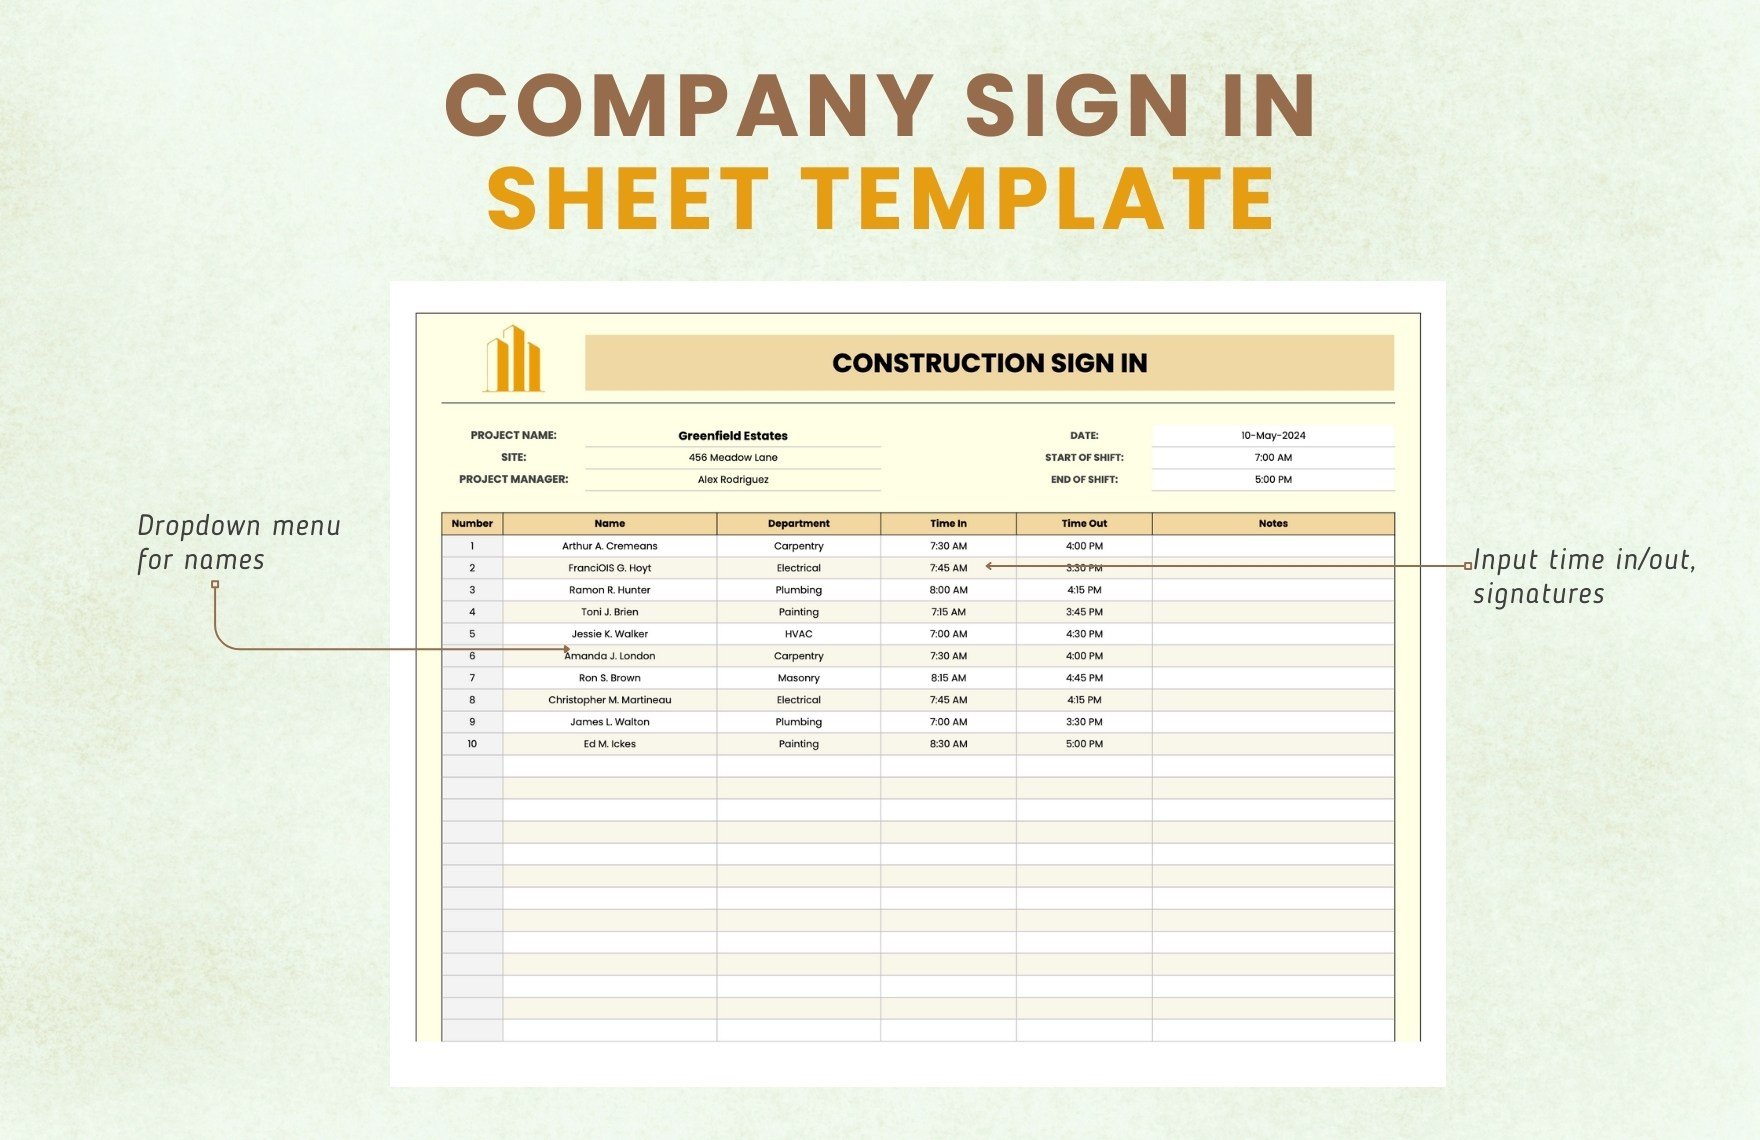 Construction Sign in Sheet Template